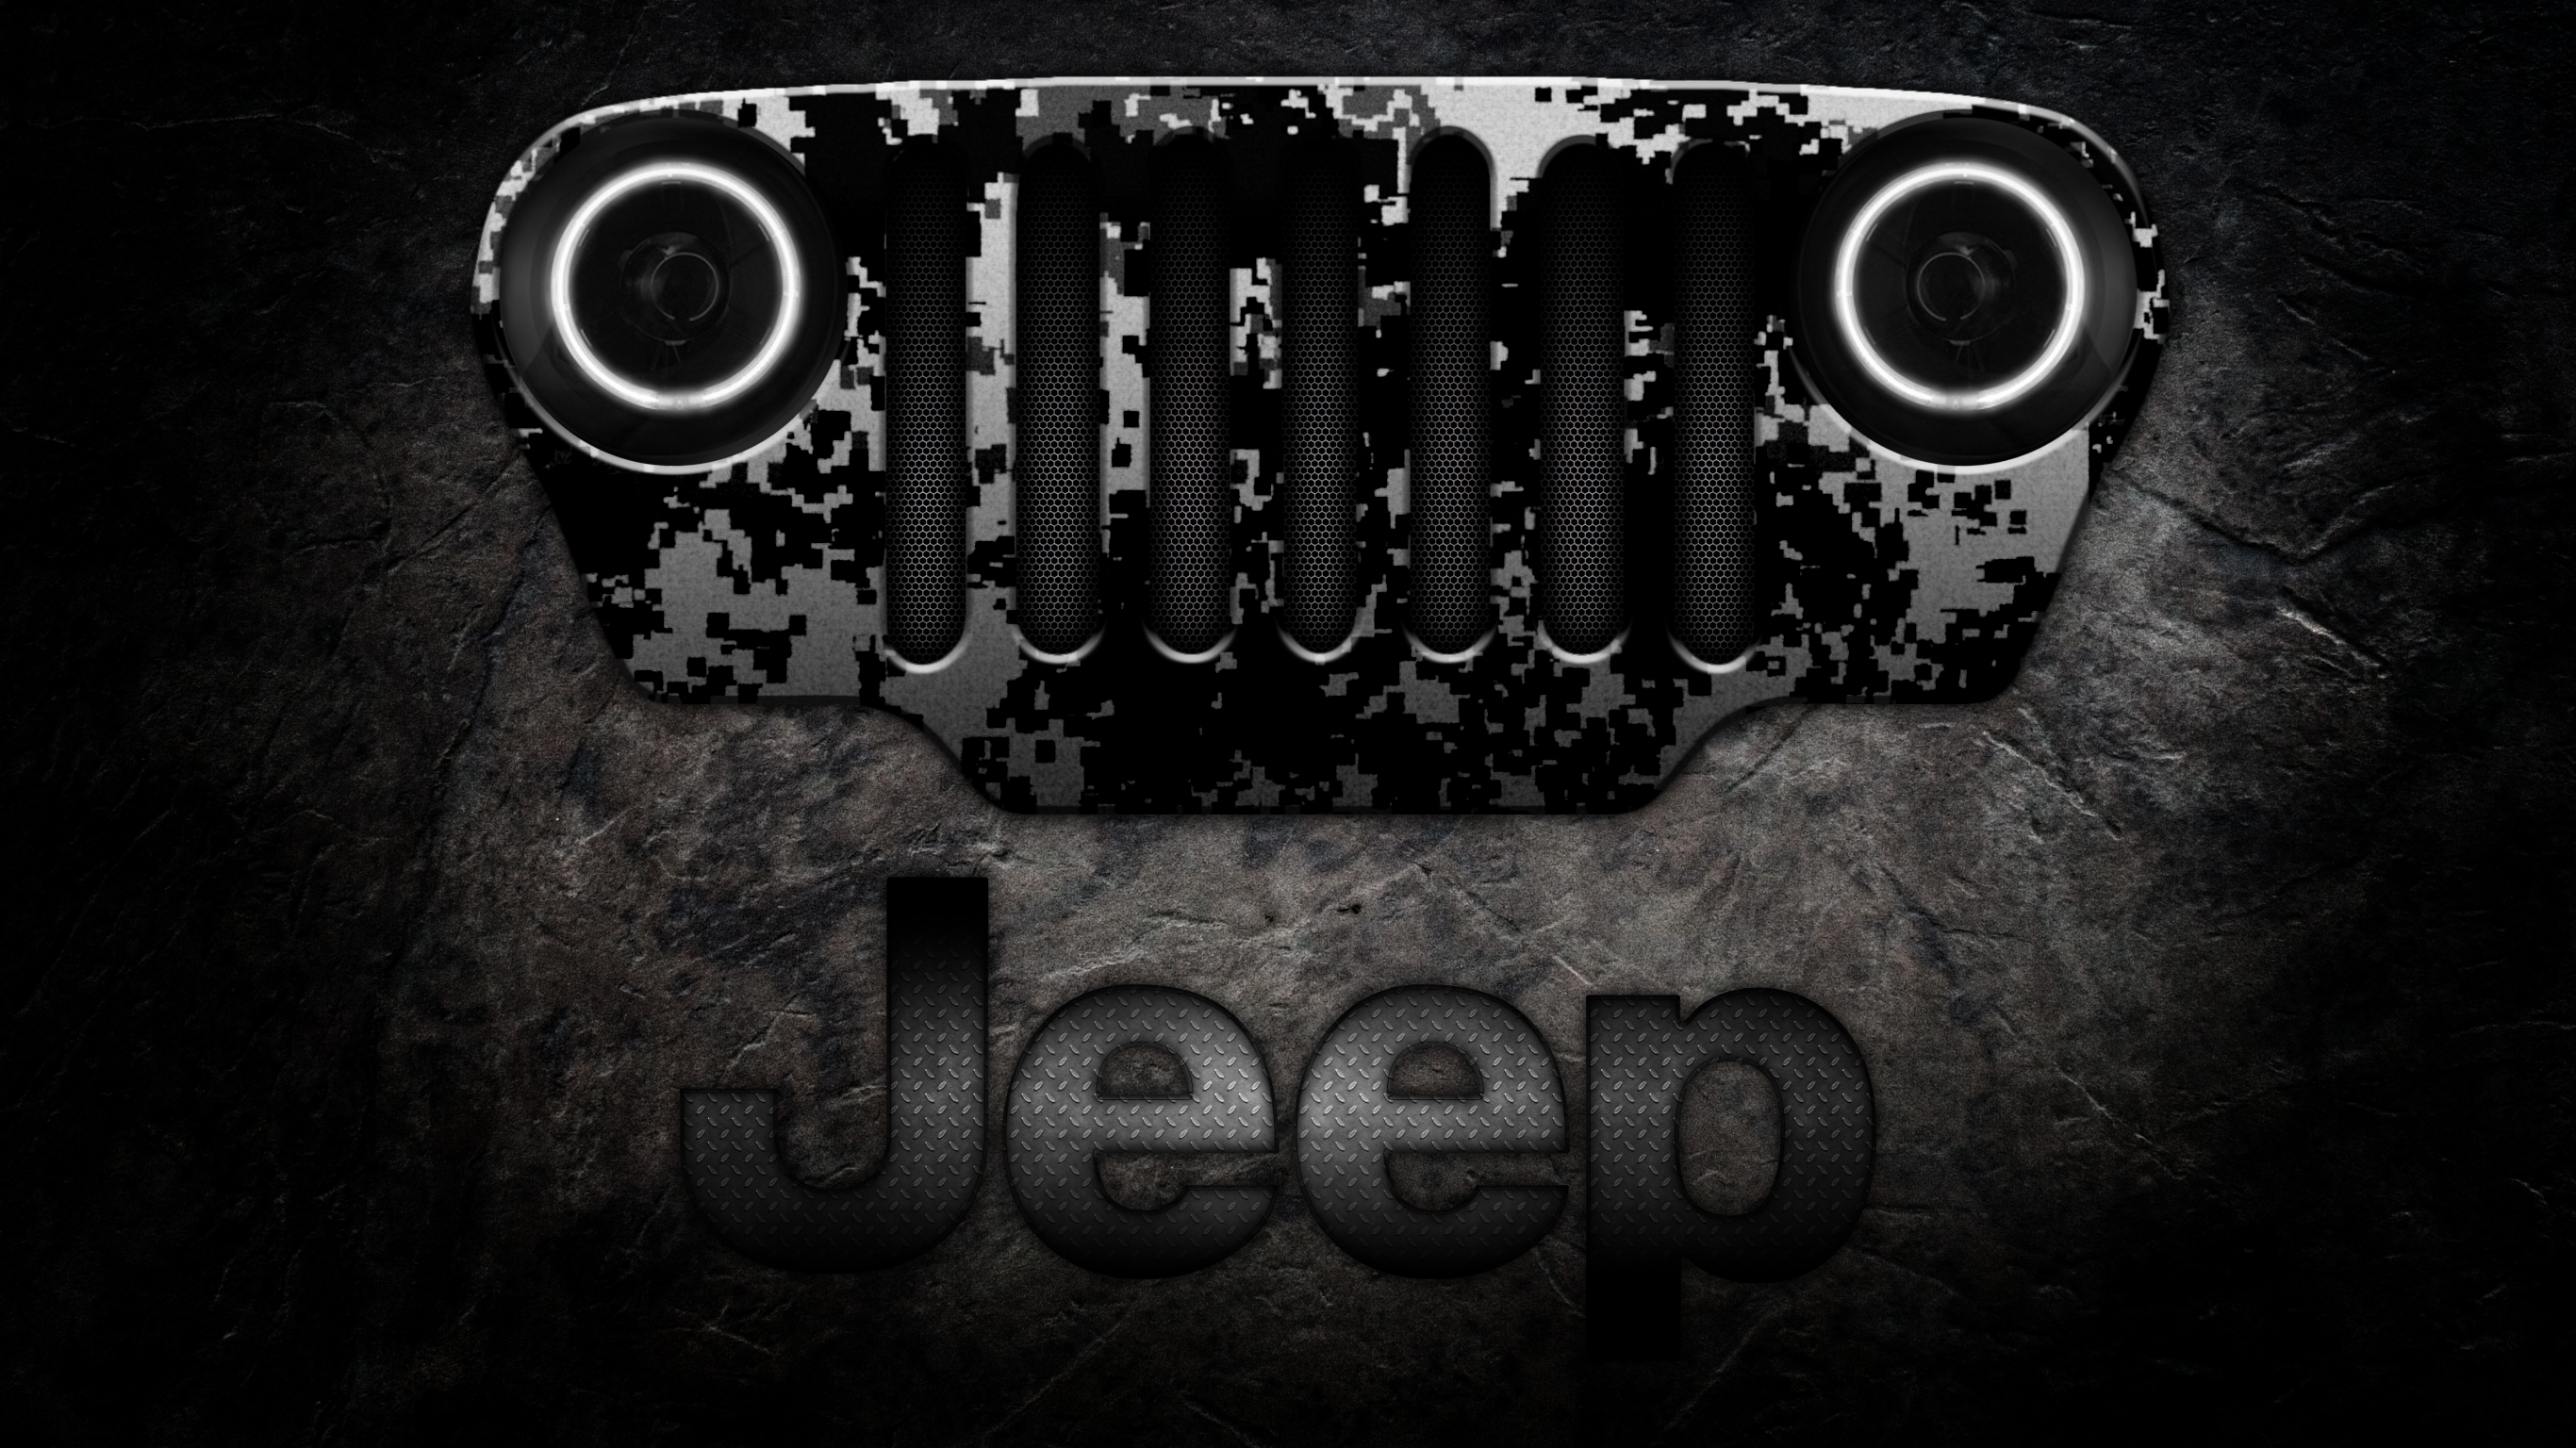 Jeep Iphone 5 Wallpaper Free and up for grabs   jeep